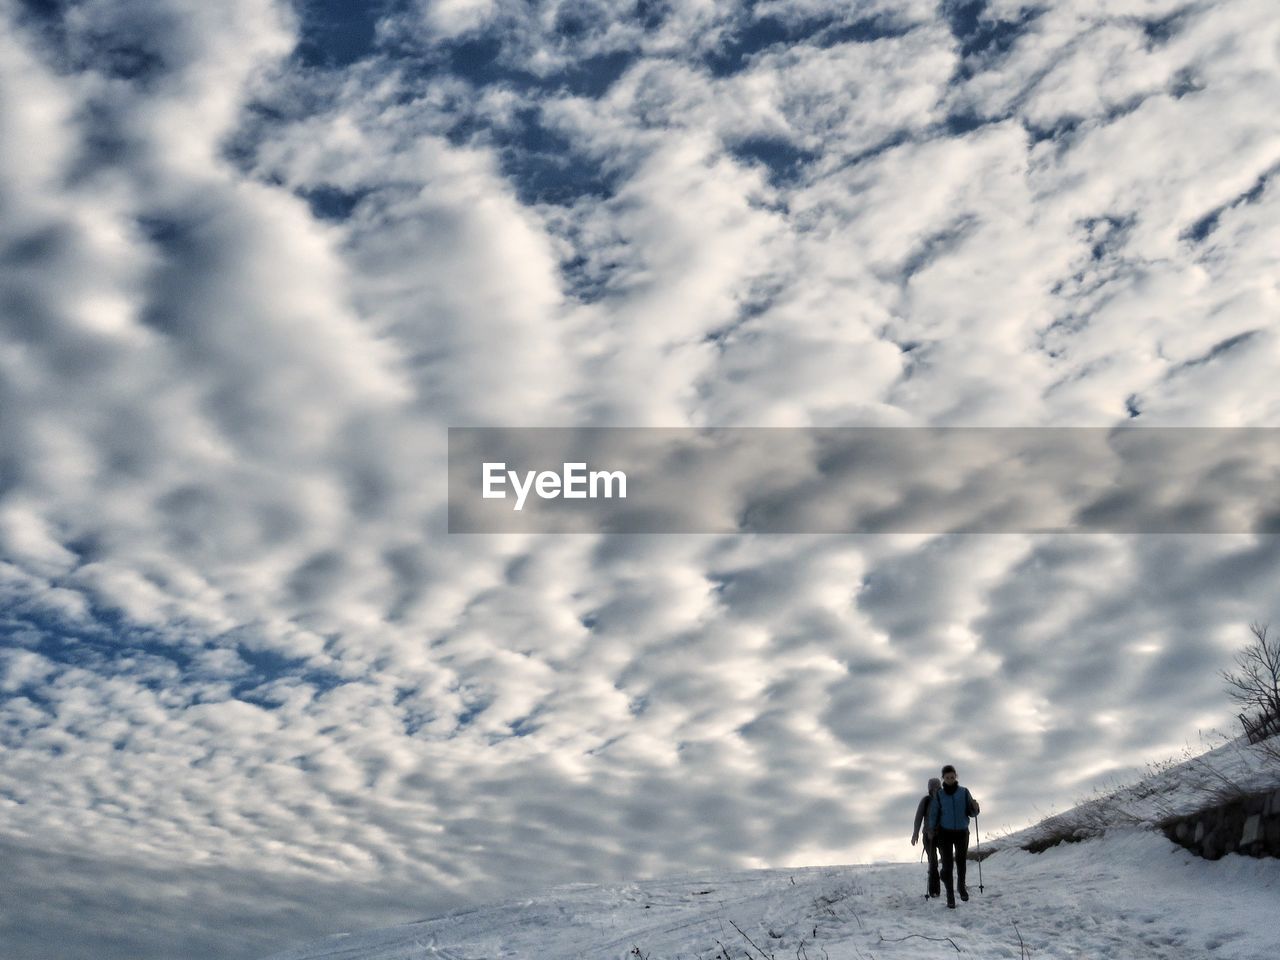 PEOPLE WALKING ON SNOWCAPPED MOUNTAIN AGAINST CLOUDY SKY